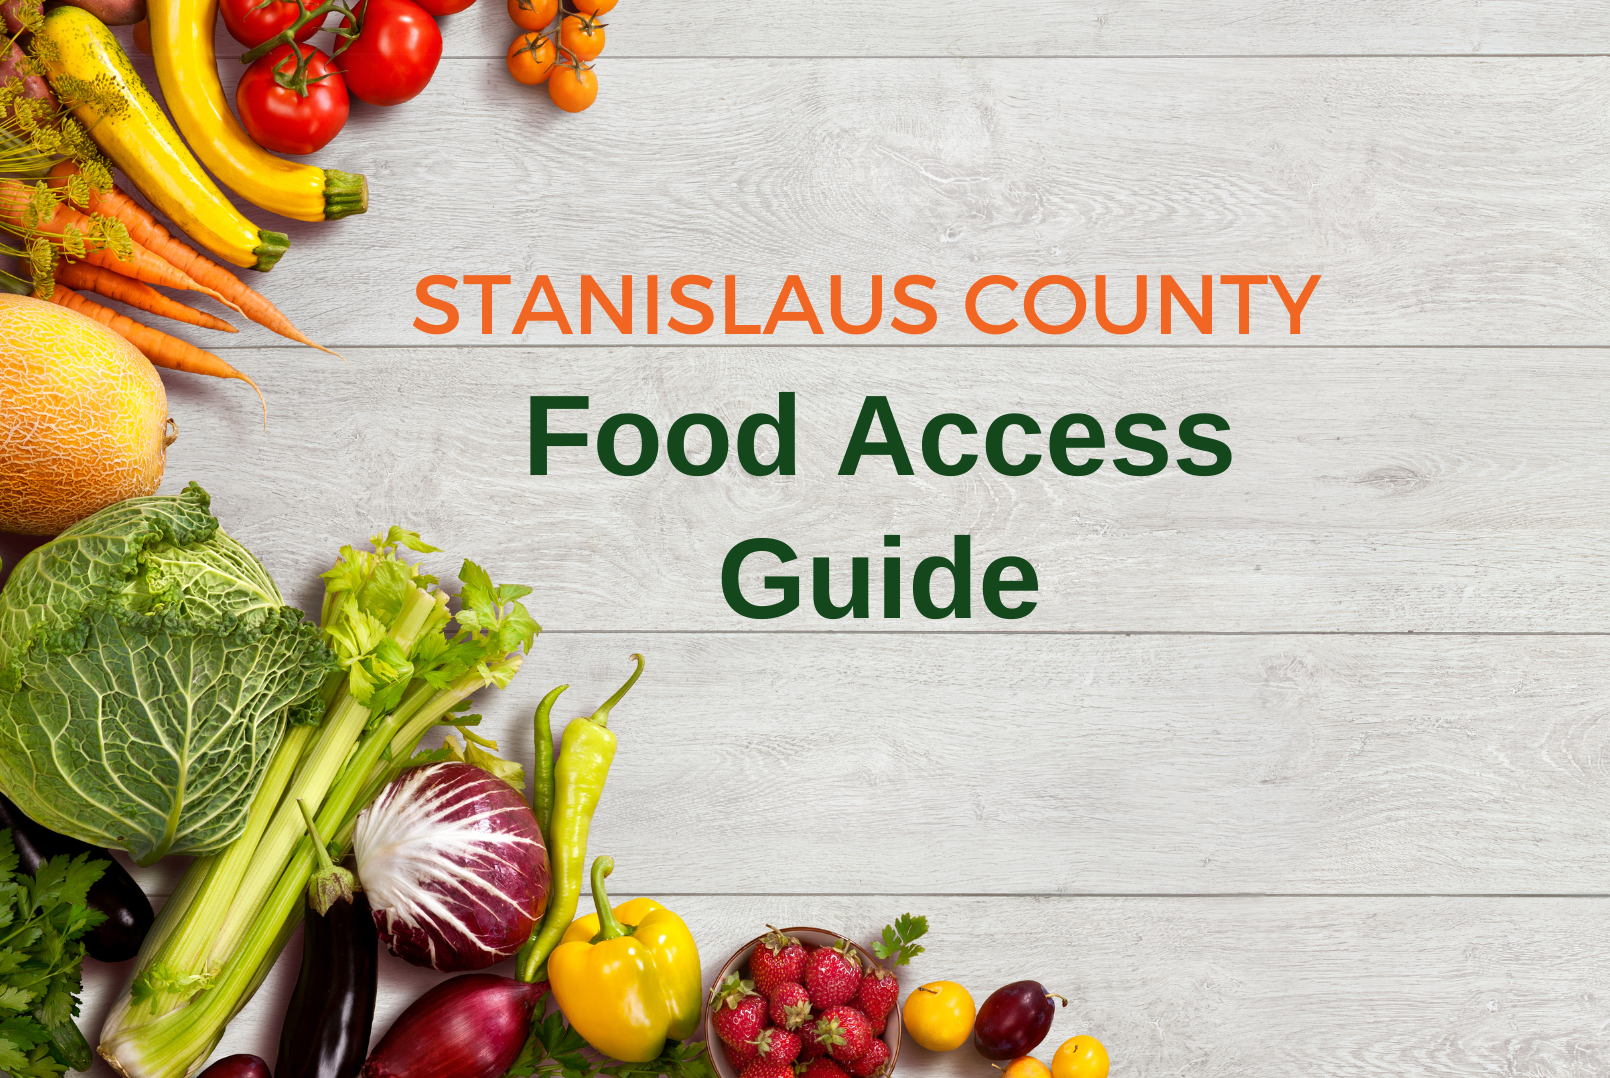 Food Access Guide